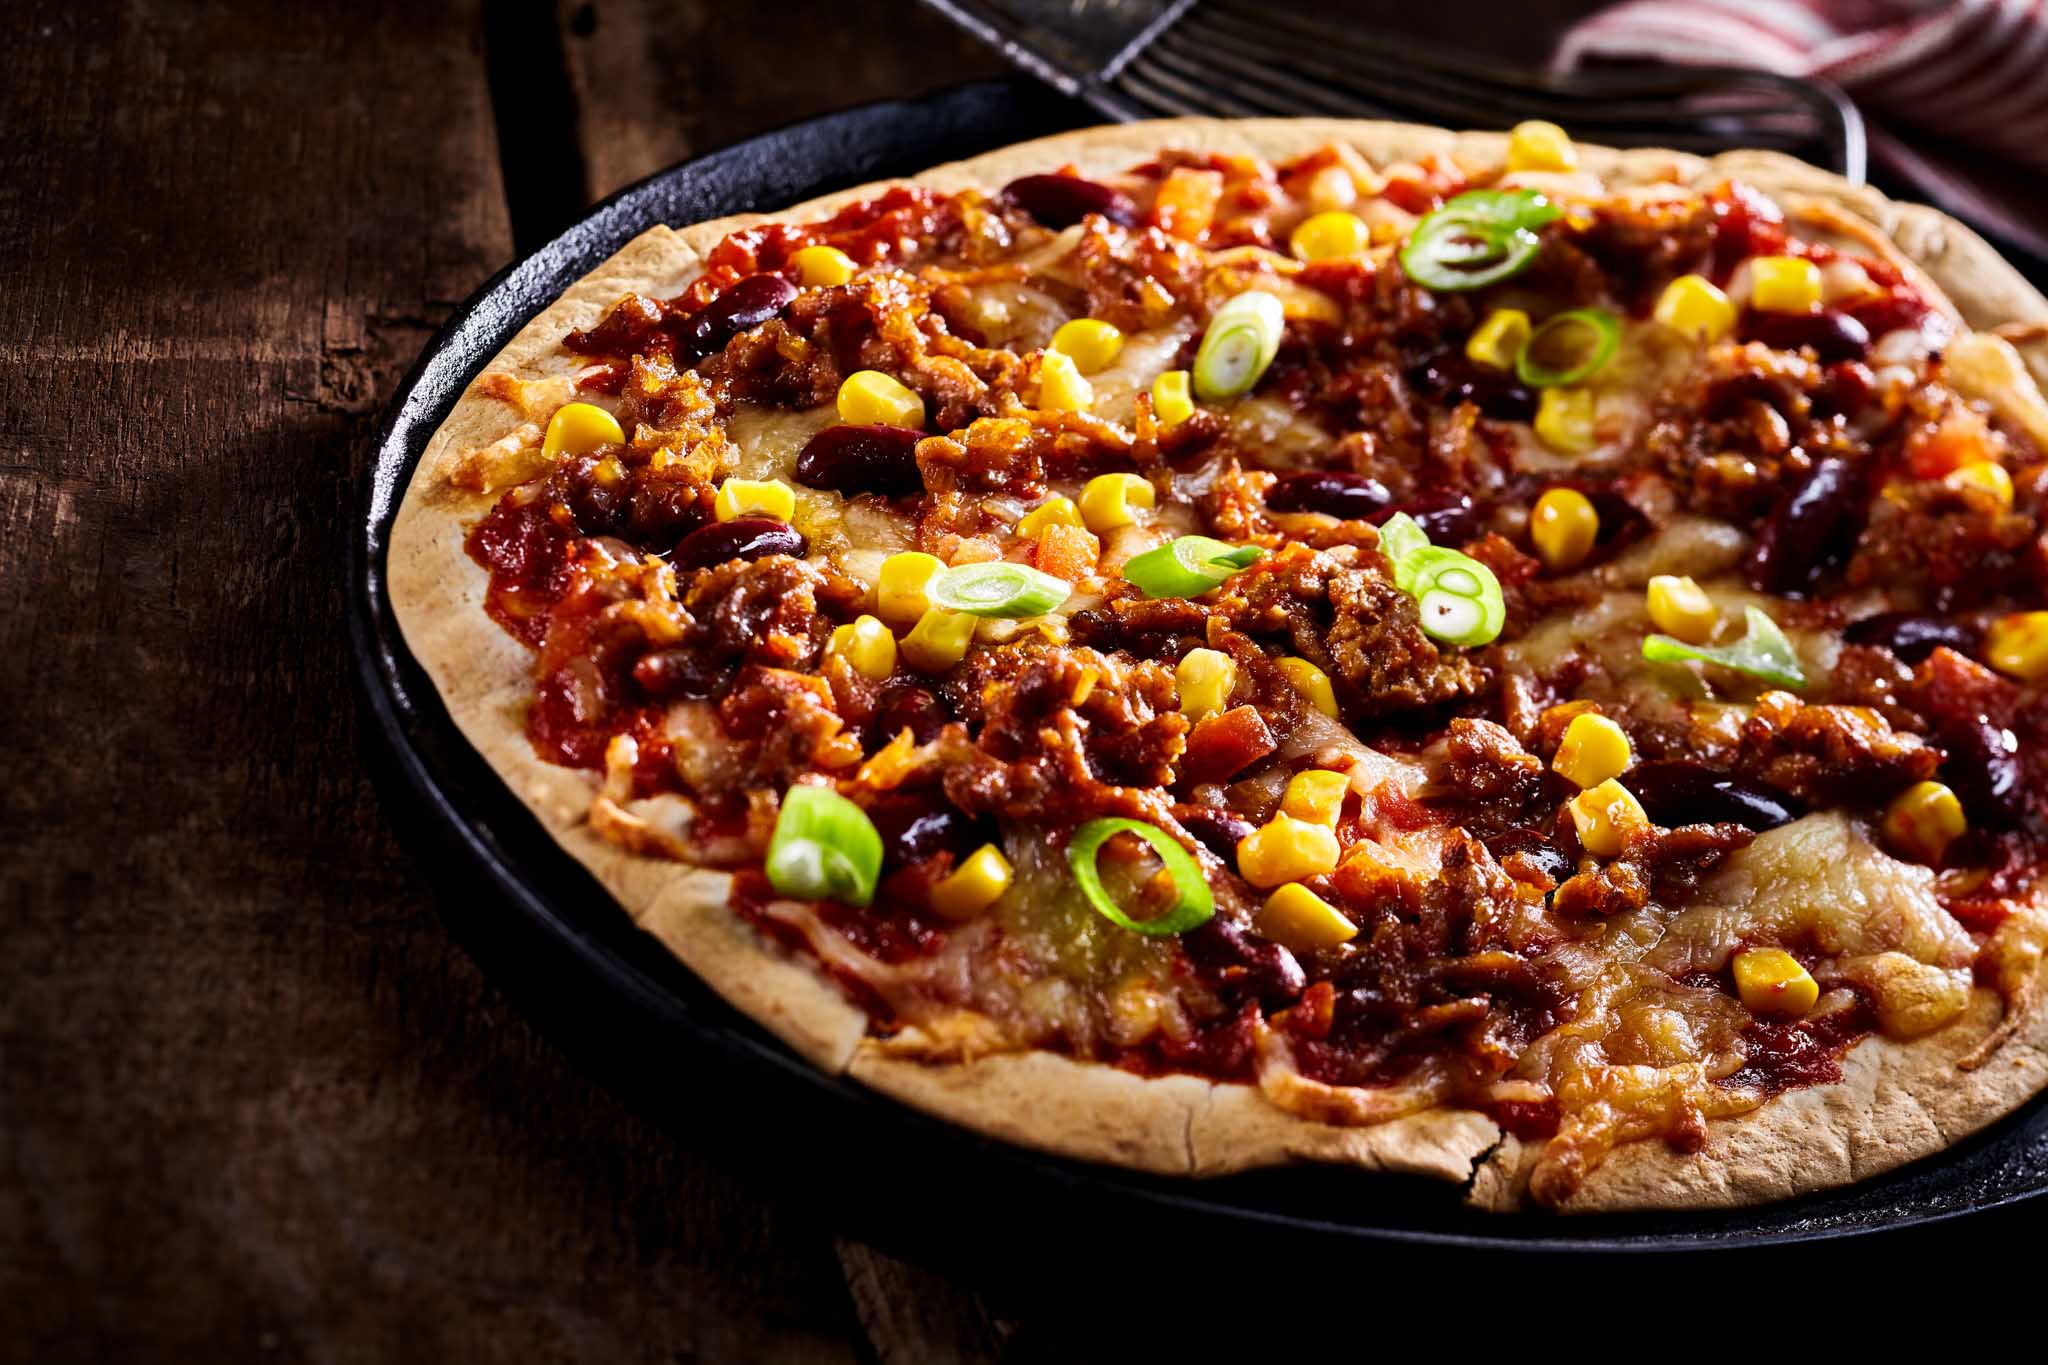 The Real Food Academy fresh made mexican pizza with beans spread.